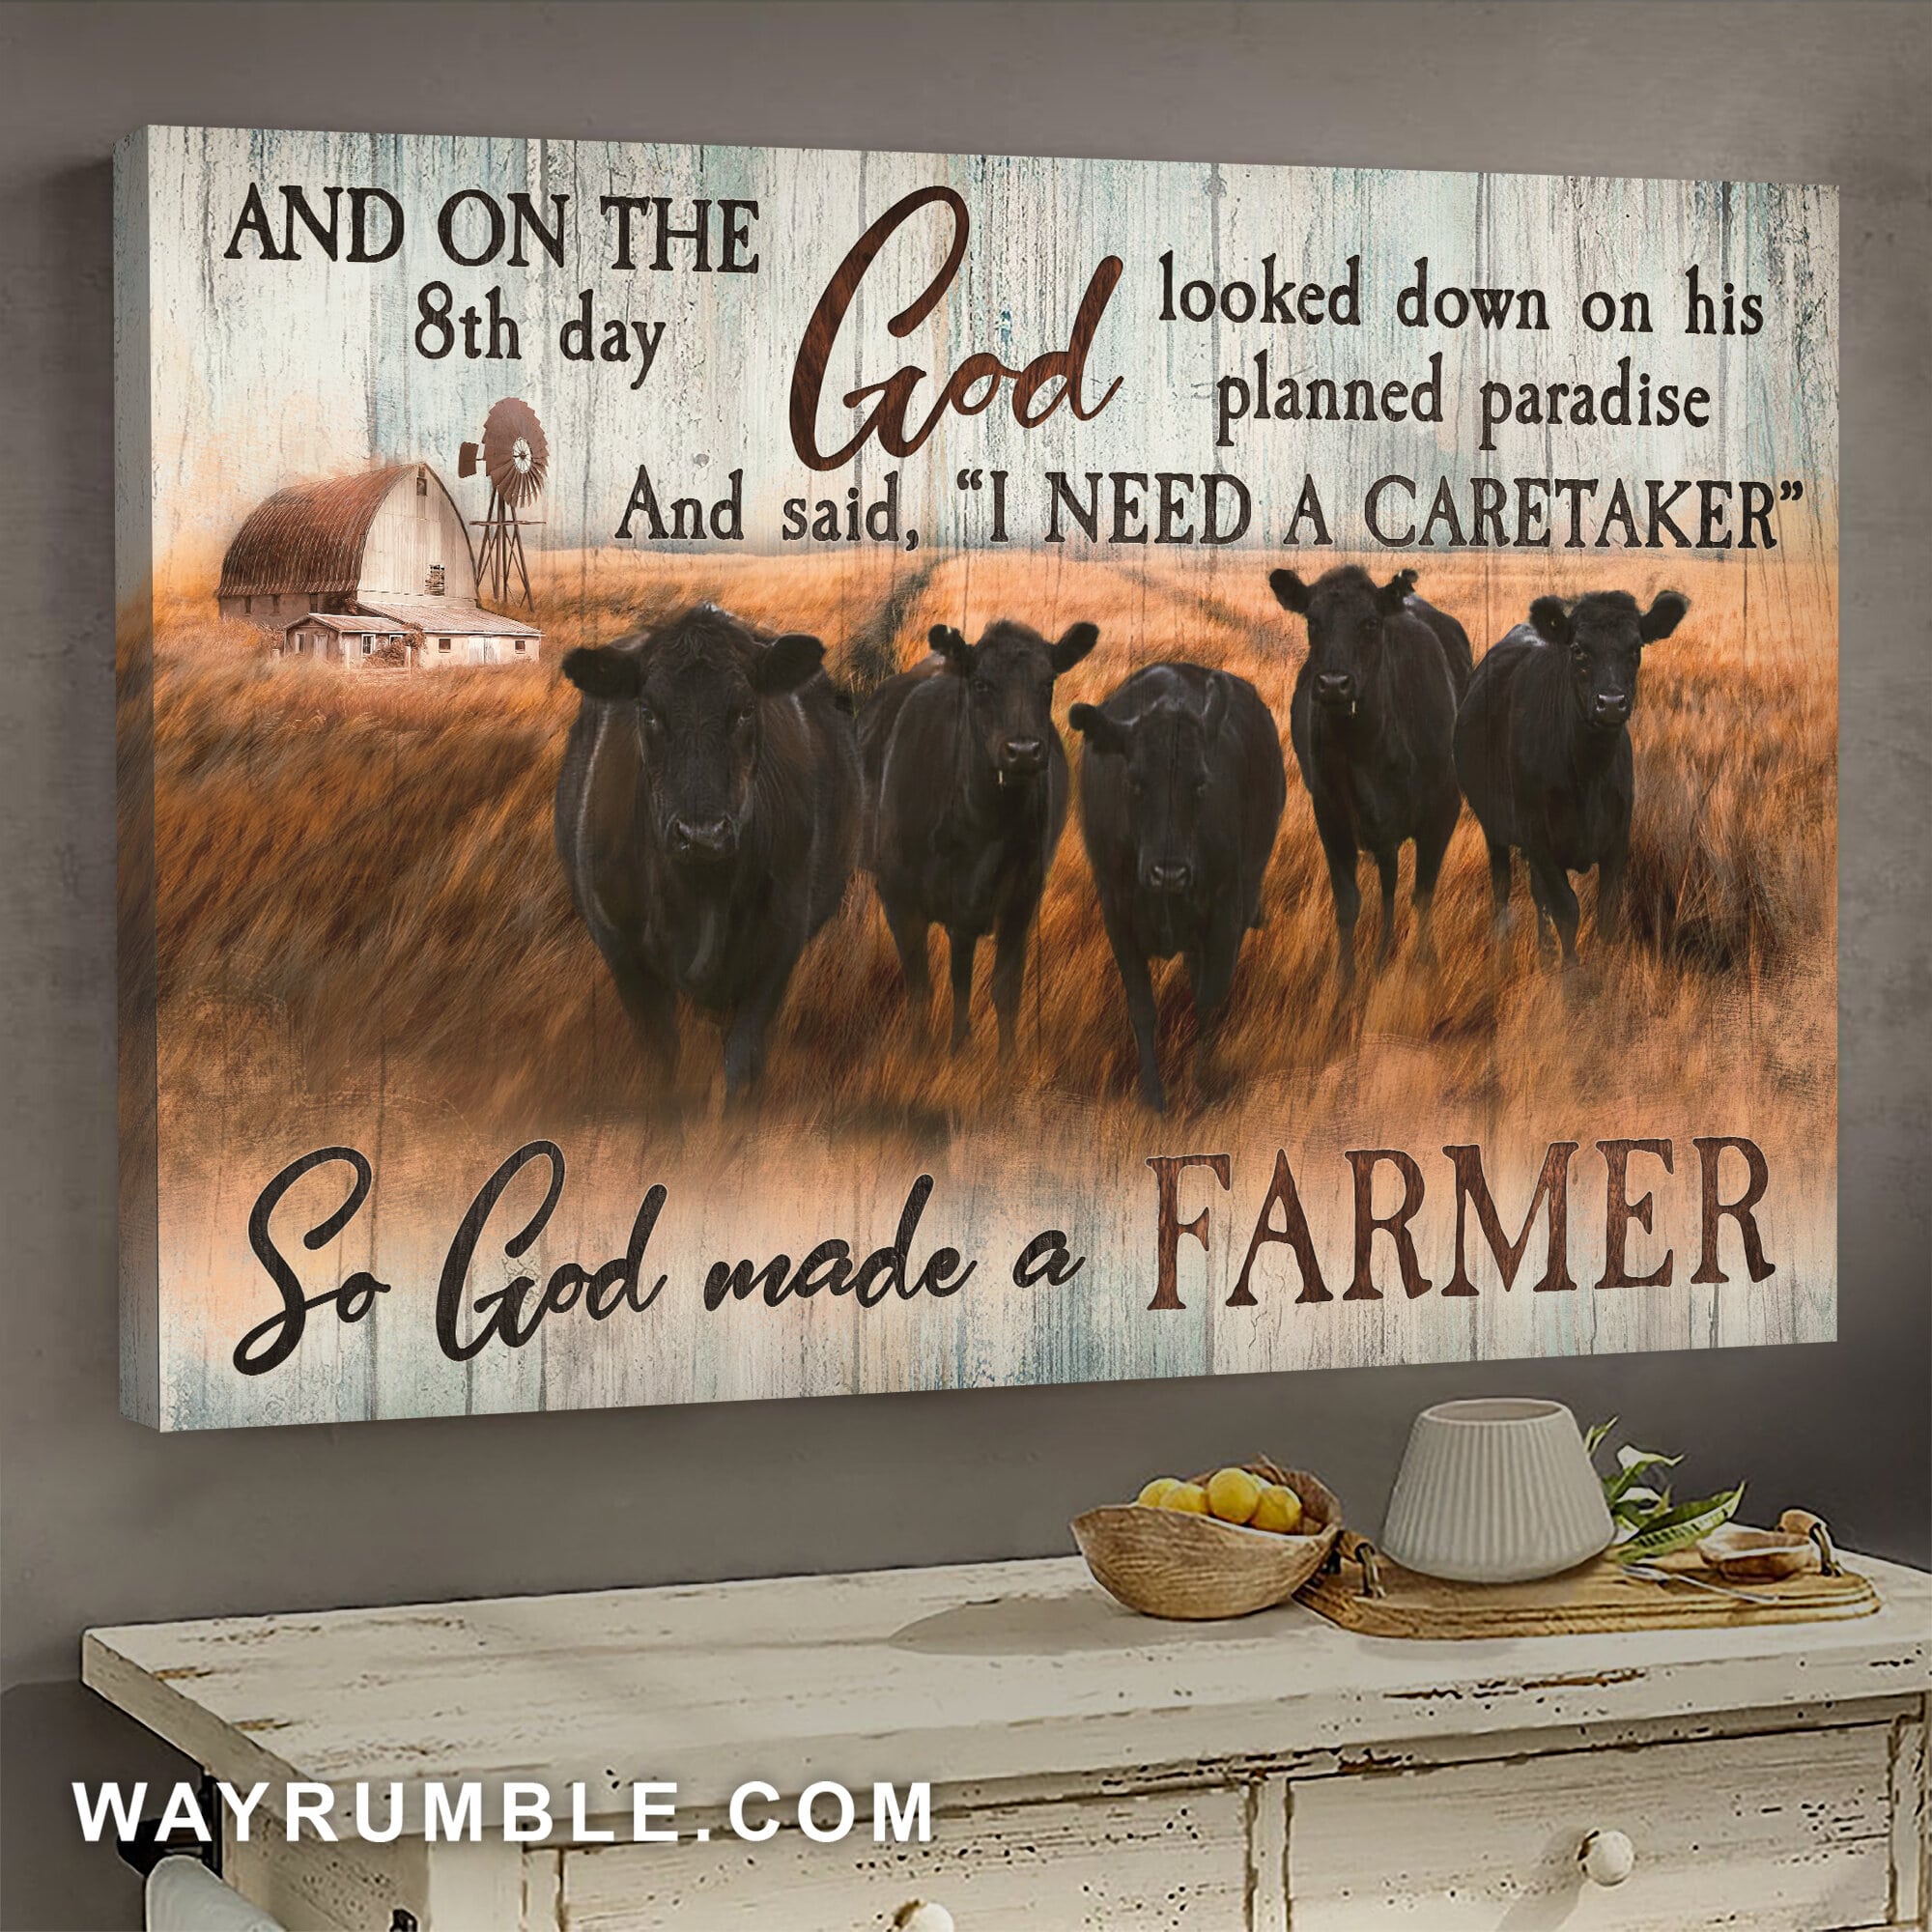 Aberdeen Angus, Tranquil Farm, God looked down on his planned paradise - Jesus Landscape Canvas Prints, Wall Art